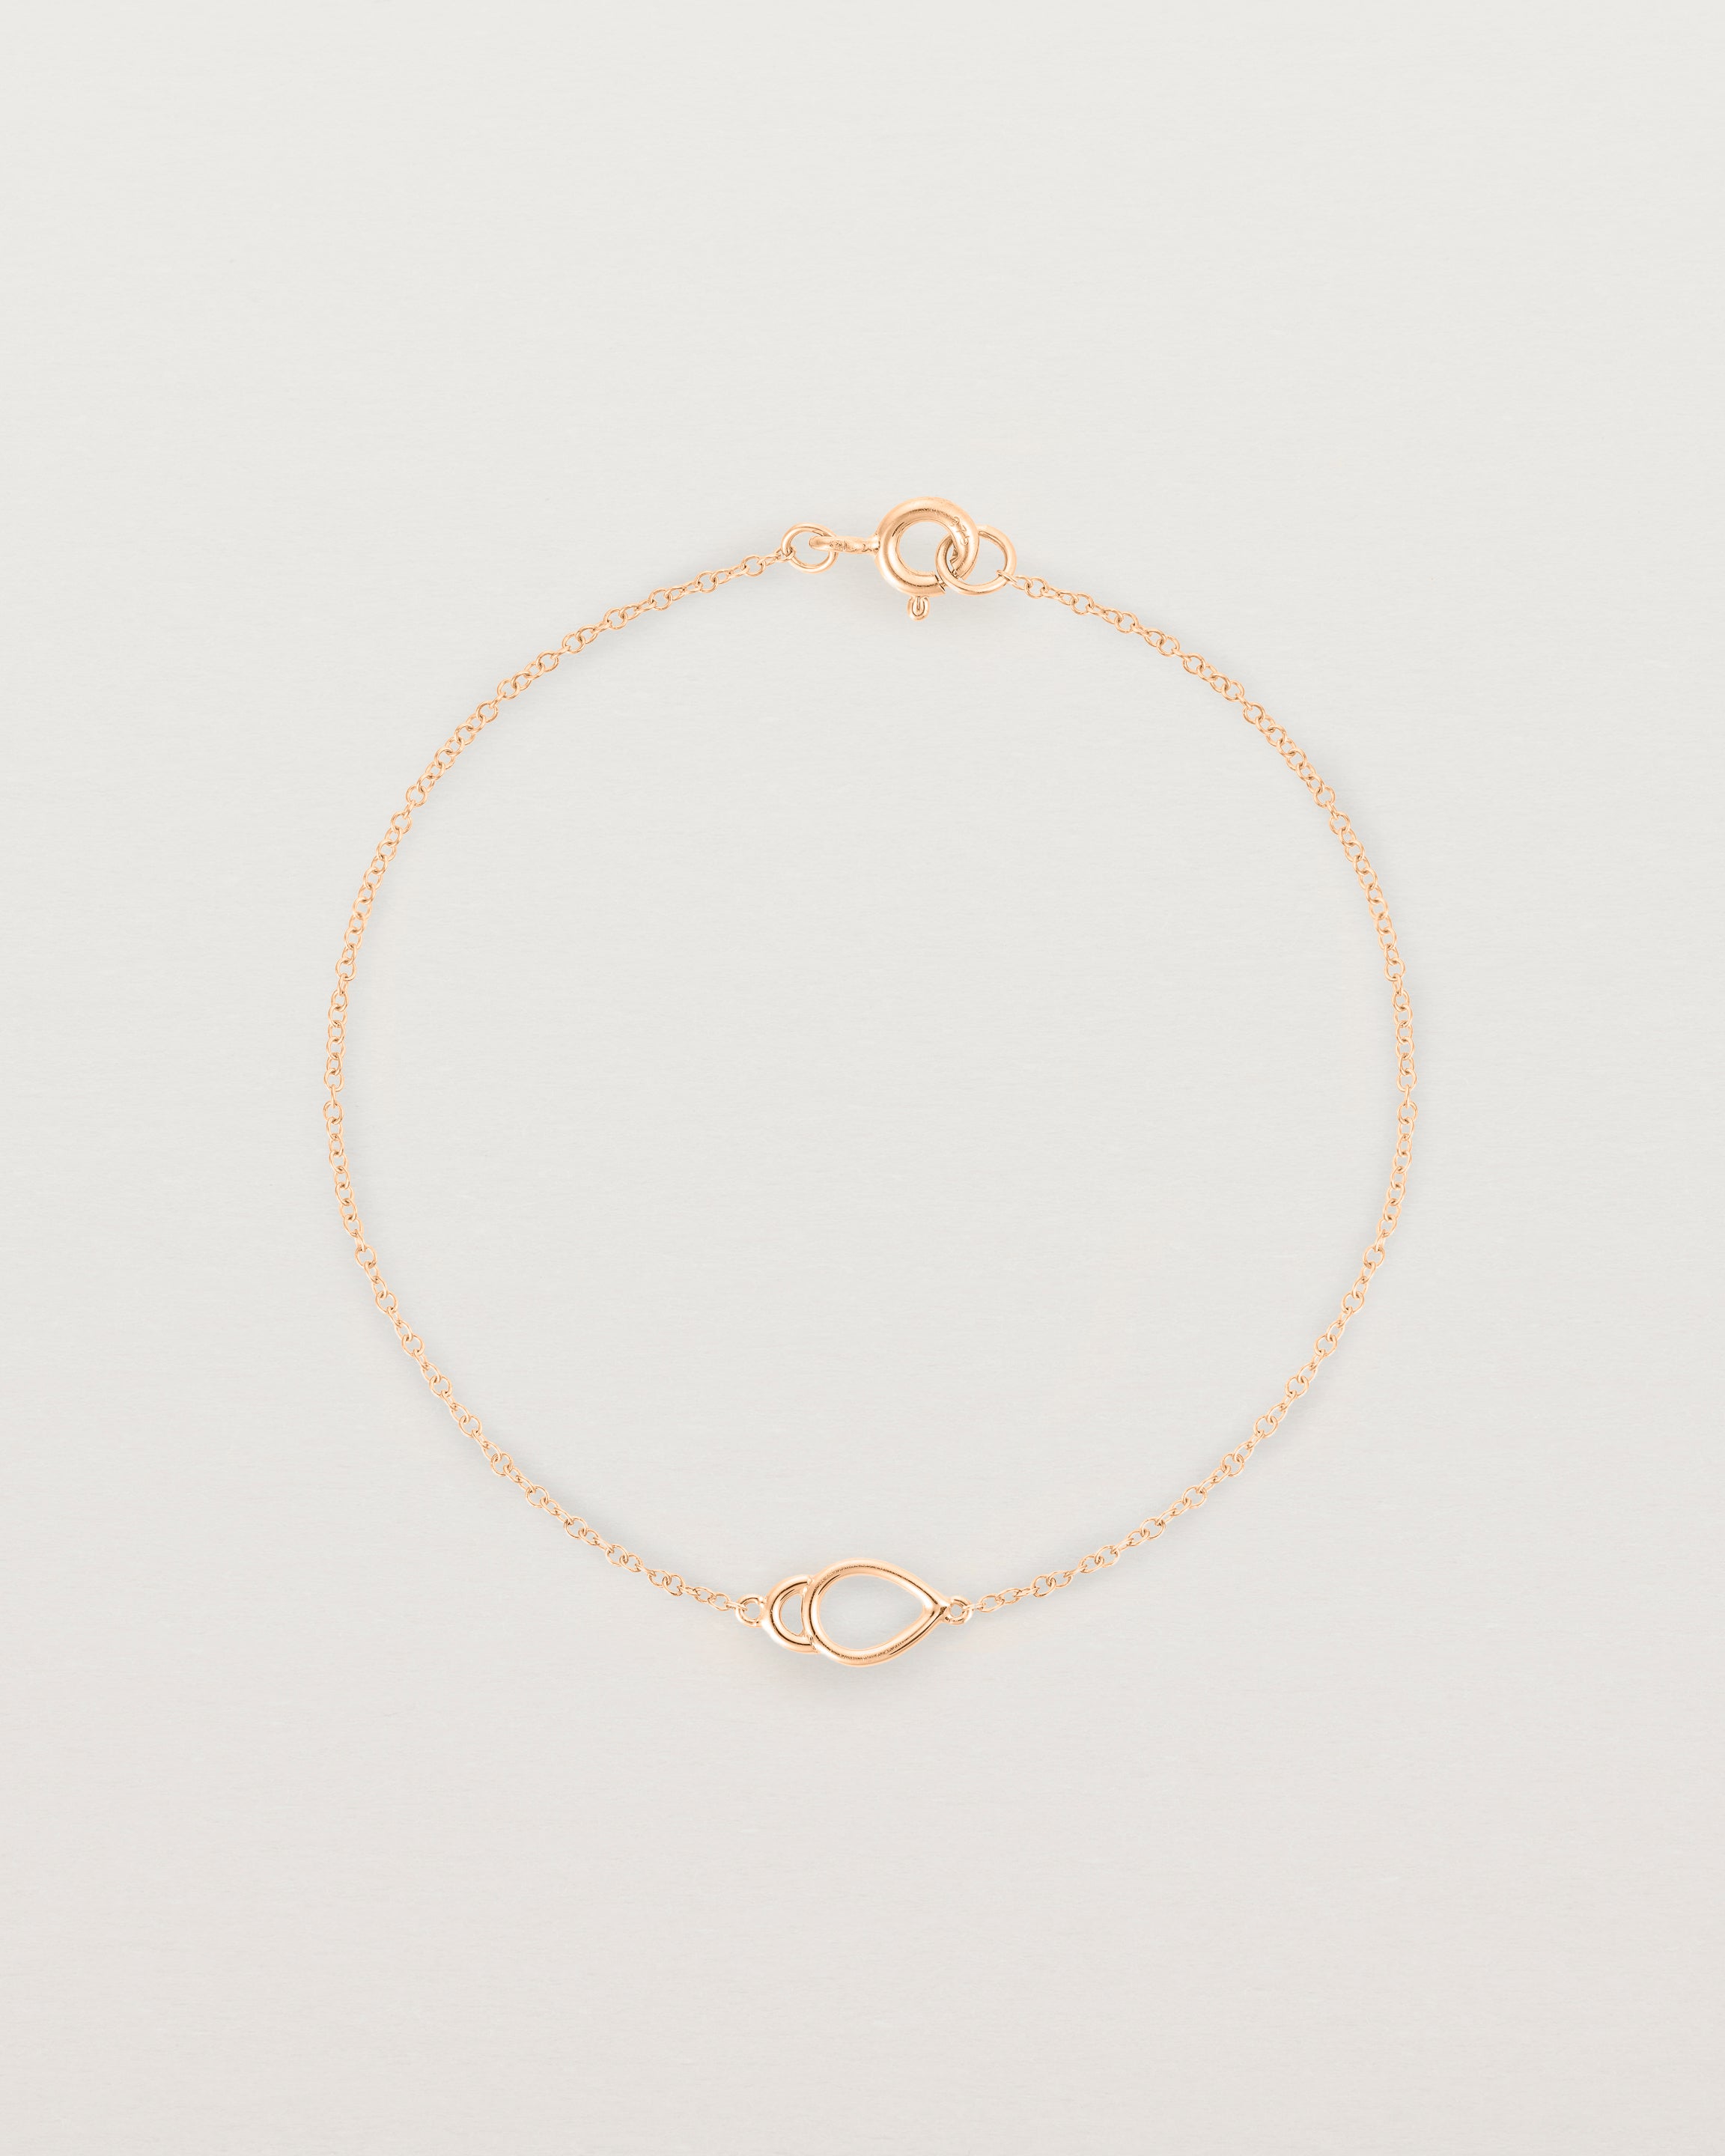 A rose gold chain with an oval pendant